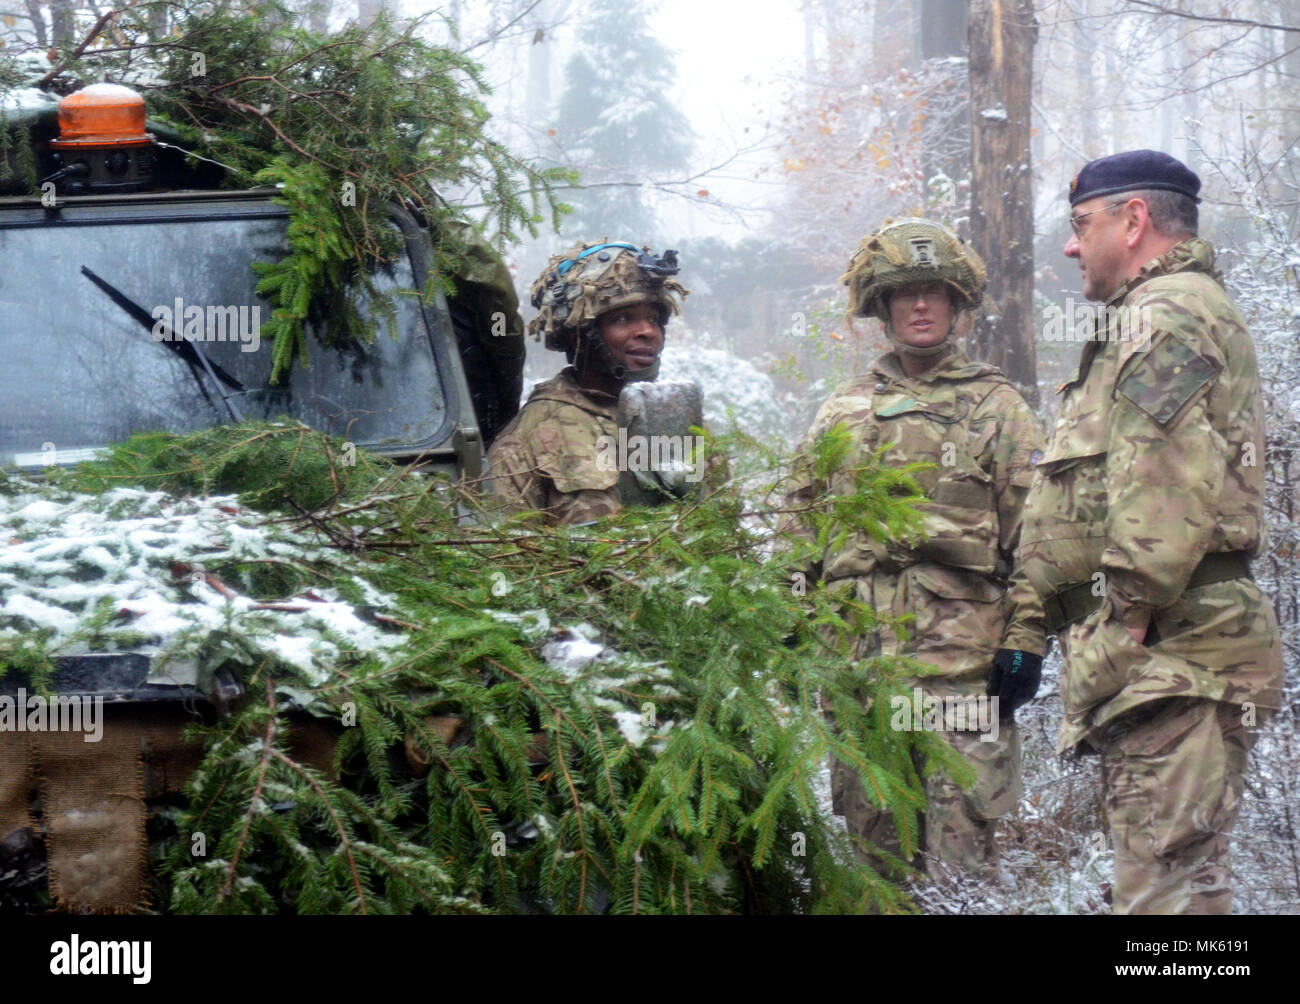 Despite the snow, British soldiers with the 1st Battalion, Royal Regiment of the Fusiliers participated in training at the U.S. Army's Joint Multinational Readiness Center in Hohenfels, Germany, as part of Allied Spirit VII, 12 Nov. 2017. Approximately 4,050 service members from 13 nations are participating in exercise Allied Spirit VII at 7th Army Training Command’s Hohenfels Training Area, Germany, Oct. 30 to Nov. 22, 2017. Allied Spirit is a U.S. Army Europe-directed, 7ATC-conducted multinational exercise series designed to develop and enhance NATO and key partner’s interoperability and rea Stock Photo